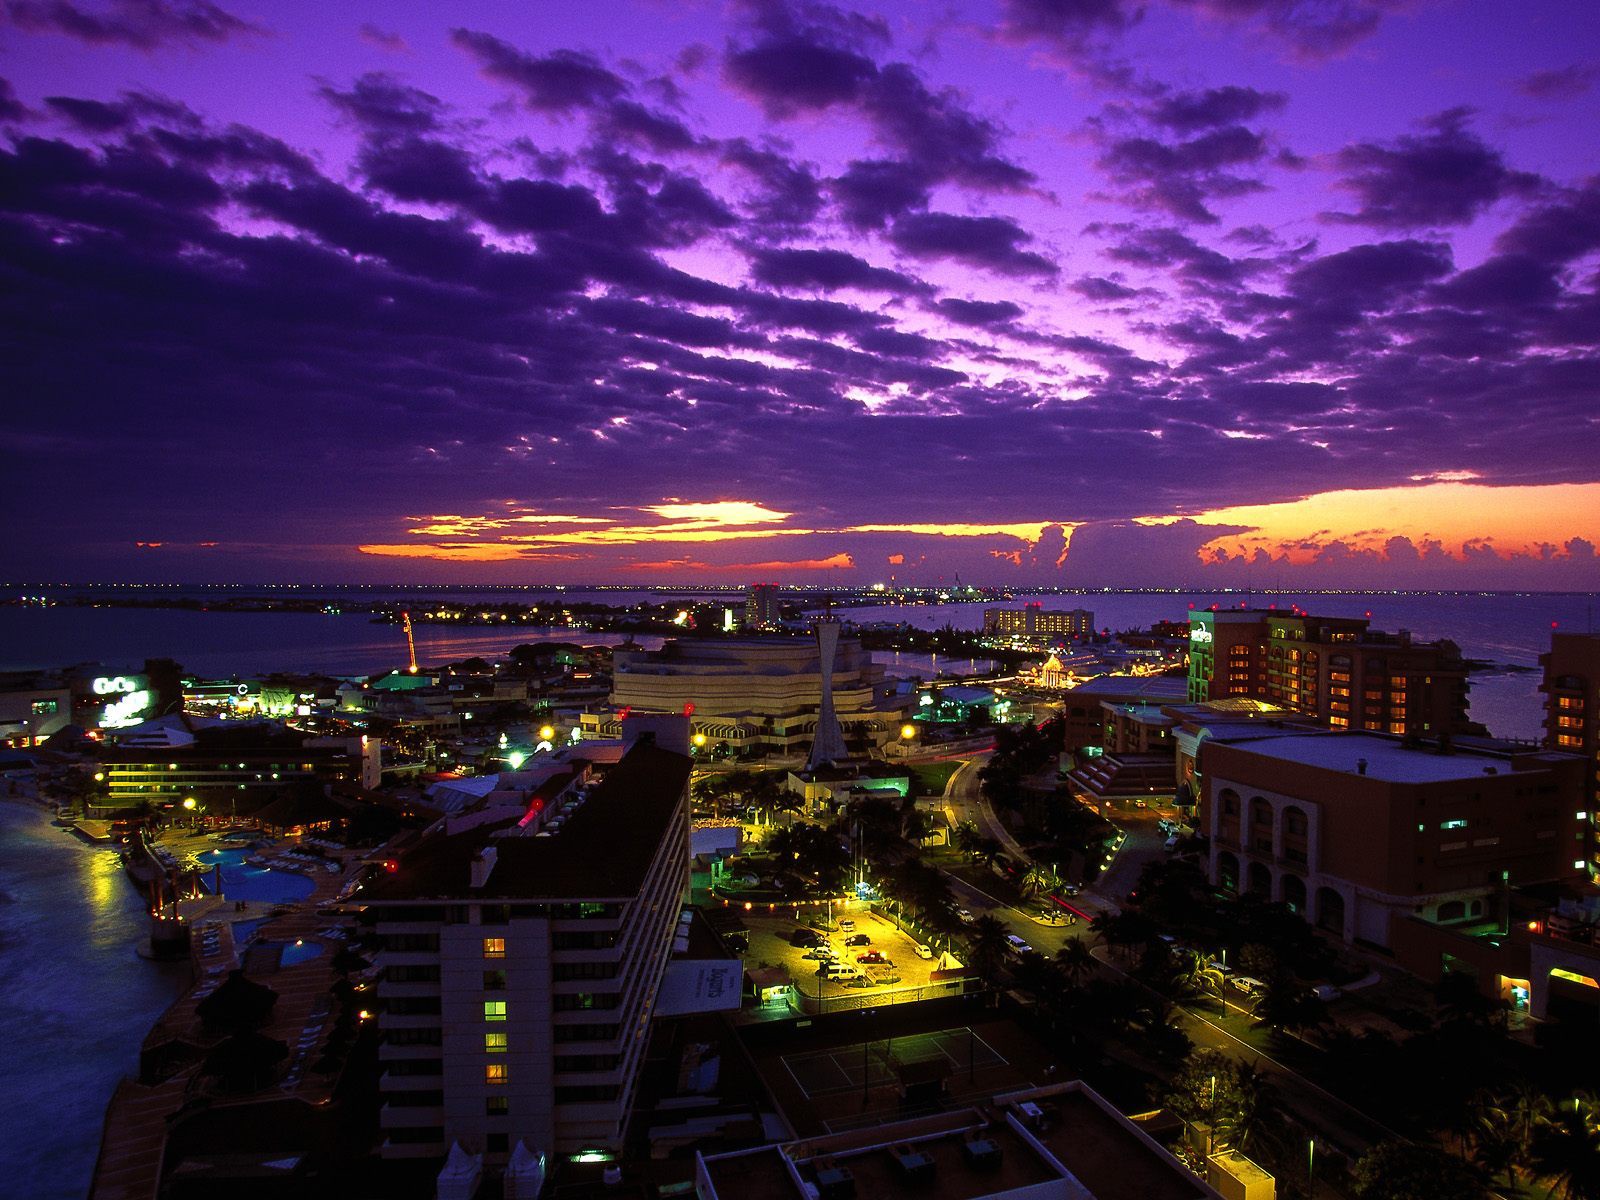 cancun at twilight mexico cancun sunset night town lights